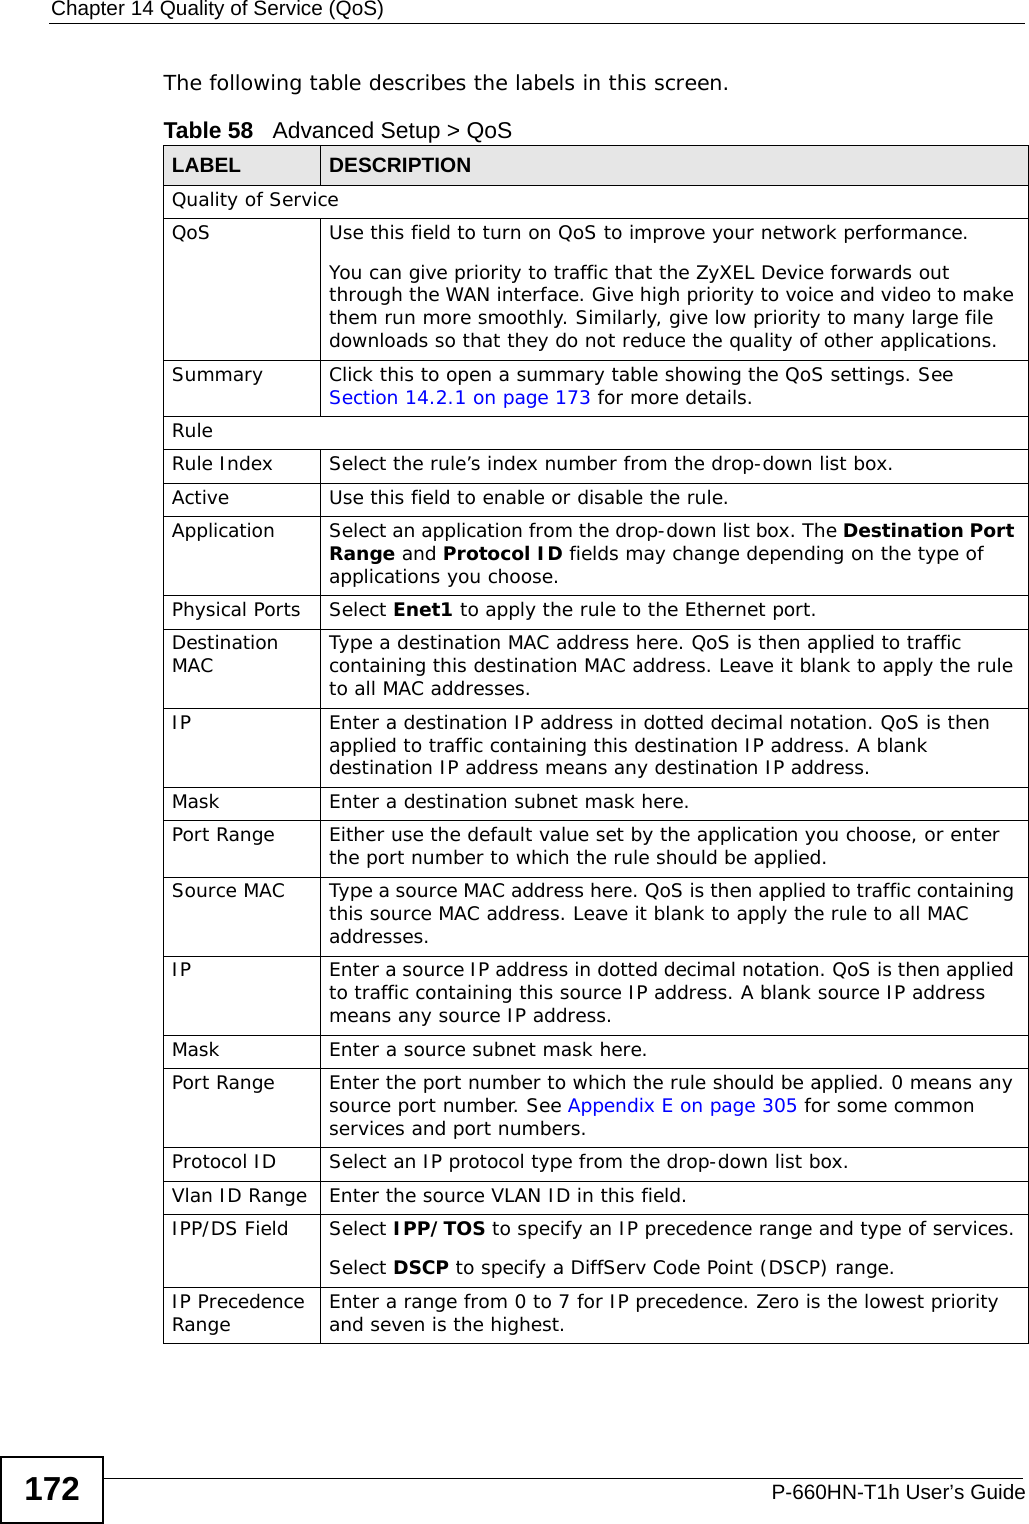 Chapter 14 Quality of Service (QoS)P-660HN-T1h User’s Guide172The following table describes the labels in this screen. Table 58   Advanced Setup &gt; QoSLABEL DESCRIPTIONQuality of ServiceQoS Use this field to turn on QoS to improve your network performance. You can give priority to traffic that the ZyXEL Device forwards out through the WAN interface. Give high priority to voice and video to make them run more smoothly. Similarly, give low priority to many large file downloads so that they do not reduce the quality of other applications. Summary Click this to open a summary table showing the QoS settings. See Section 14.2.1 on page 173 for more details.RuleRule Index Select the rule’s index number from the drop-down list box.Active Use this field to enable or disable the rule.Application Select an application from the drop-down list box. The Destination Port Range and Protocol ID fields may change depending on the type of applications you choose.Physical Ports Select Enet1 to apply the rule to the Ethernet port.Destination MAC Type a destination MAC address here. QoS is then applied to traffic containing this destination MAC address. Leave it blank to apply the rule to all MAC addresses.IP Enter a destination IP address in dotted decimal notation. QoS is then applied to traffic containing this destination IP address. A blank destination IP address means any destination IP address.Mask Enter a destination subnet mask here.Port Range Either use the default value set by the application you choose, or enter the port number to which the rule should be applied.Source MAC Type a source MAC address here. QoS is then applied to traffic containing this source MAC address. Leave it blank to apply the rule to all MAC addresses.IP Enter a source IP address in dotted decimal notation. QoS is then applied to traffic containing this source IP address. A blank source IP address means any source IP address.Mask Enter a source subnet mask here.Port Range Enter the port number to which the rule should be applied. 0 means any source port number. See Appendix E on page 305 for some common services and port numbers.Protocol ID Select an IP protocol type from the drop-down list box.Vlan ID Range Enter the source VLAN ID in this field.IPP/DS Field Select IPP/TOS to specify an IP precedence range and type of services.Select DSCP to specify a DiffServ Code Point (DSCP) range.IP Precedence Range Enter a range from 0 to 7 for IP precedence. Zero is the lowest priority and seven is the highest.